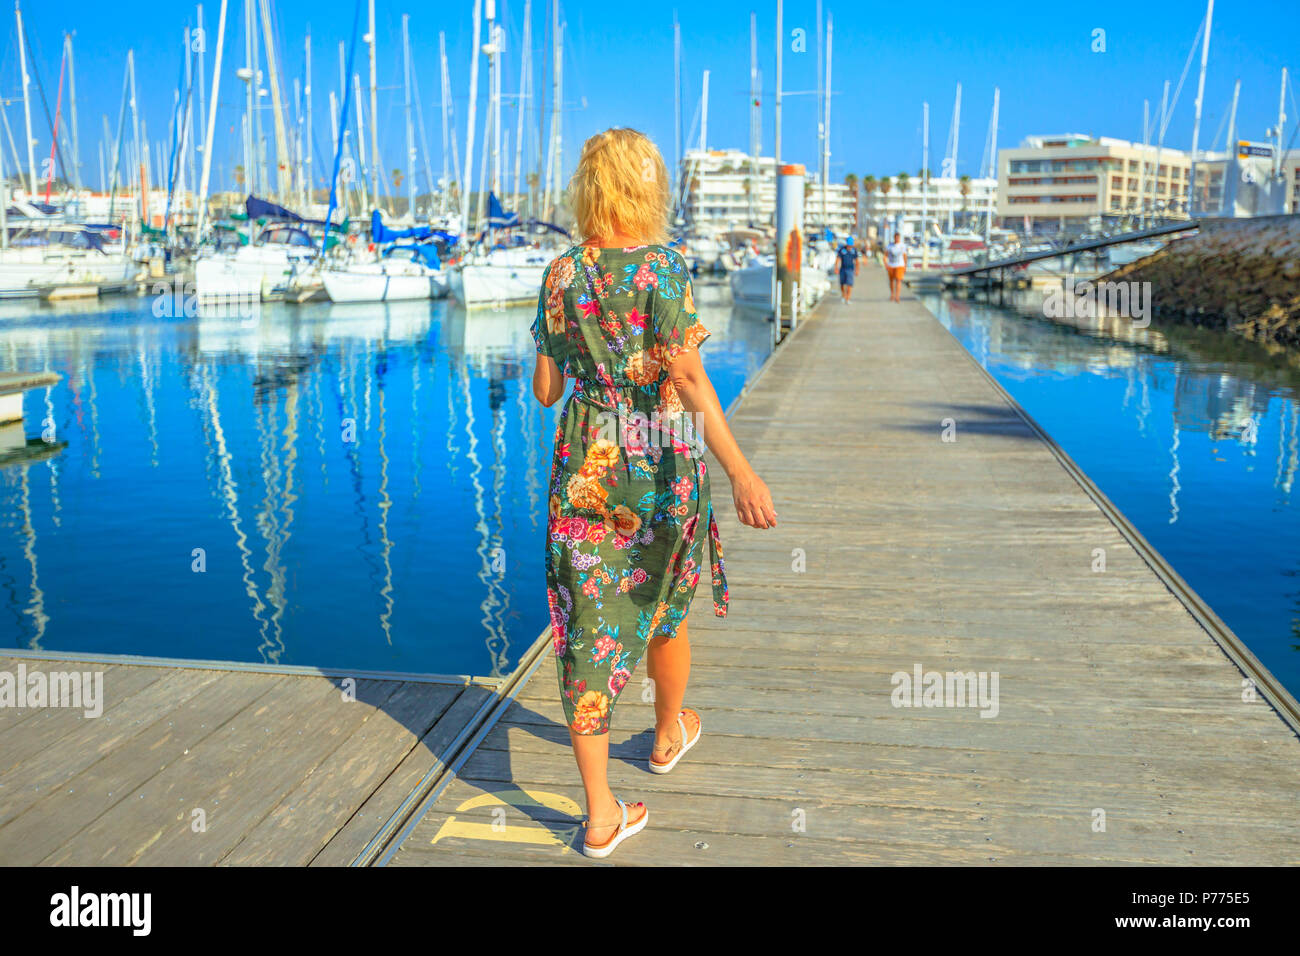 Tourism in Portugal. Lifestyle female tourist walking on wooden jetty at Marina de Lagos on Algarve coast, Portugal, Europe. Caucasian woman at Bay of Lagos in summer holidays. Stock Photo